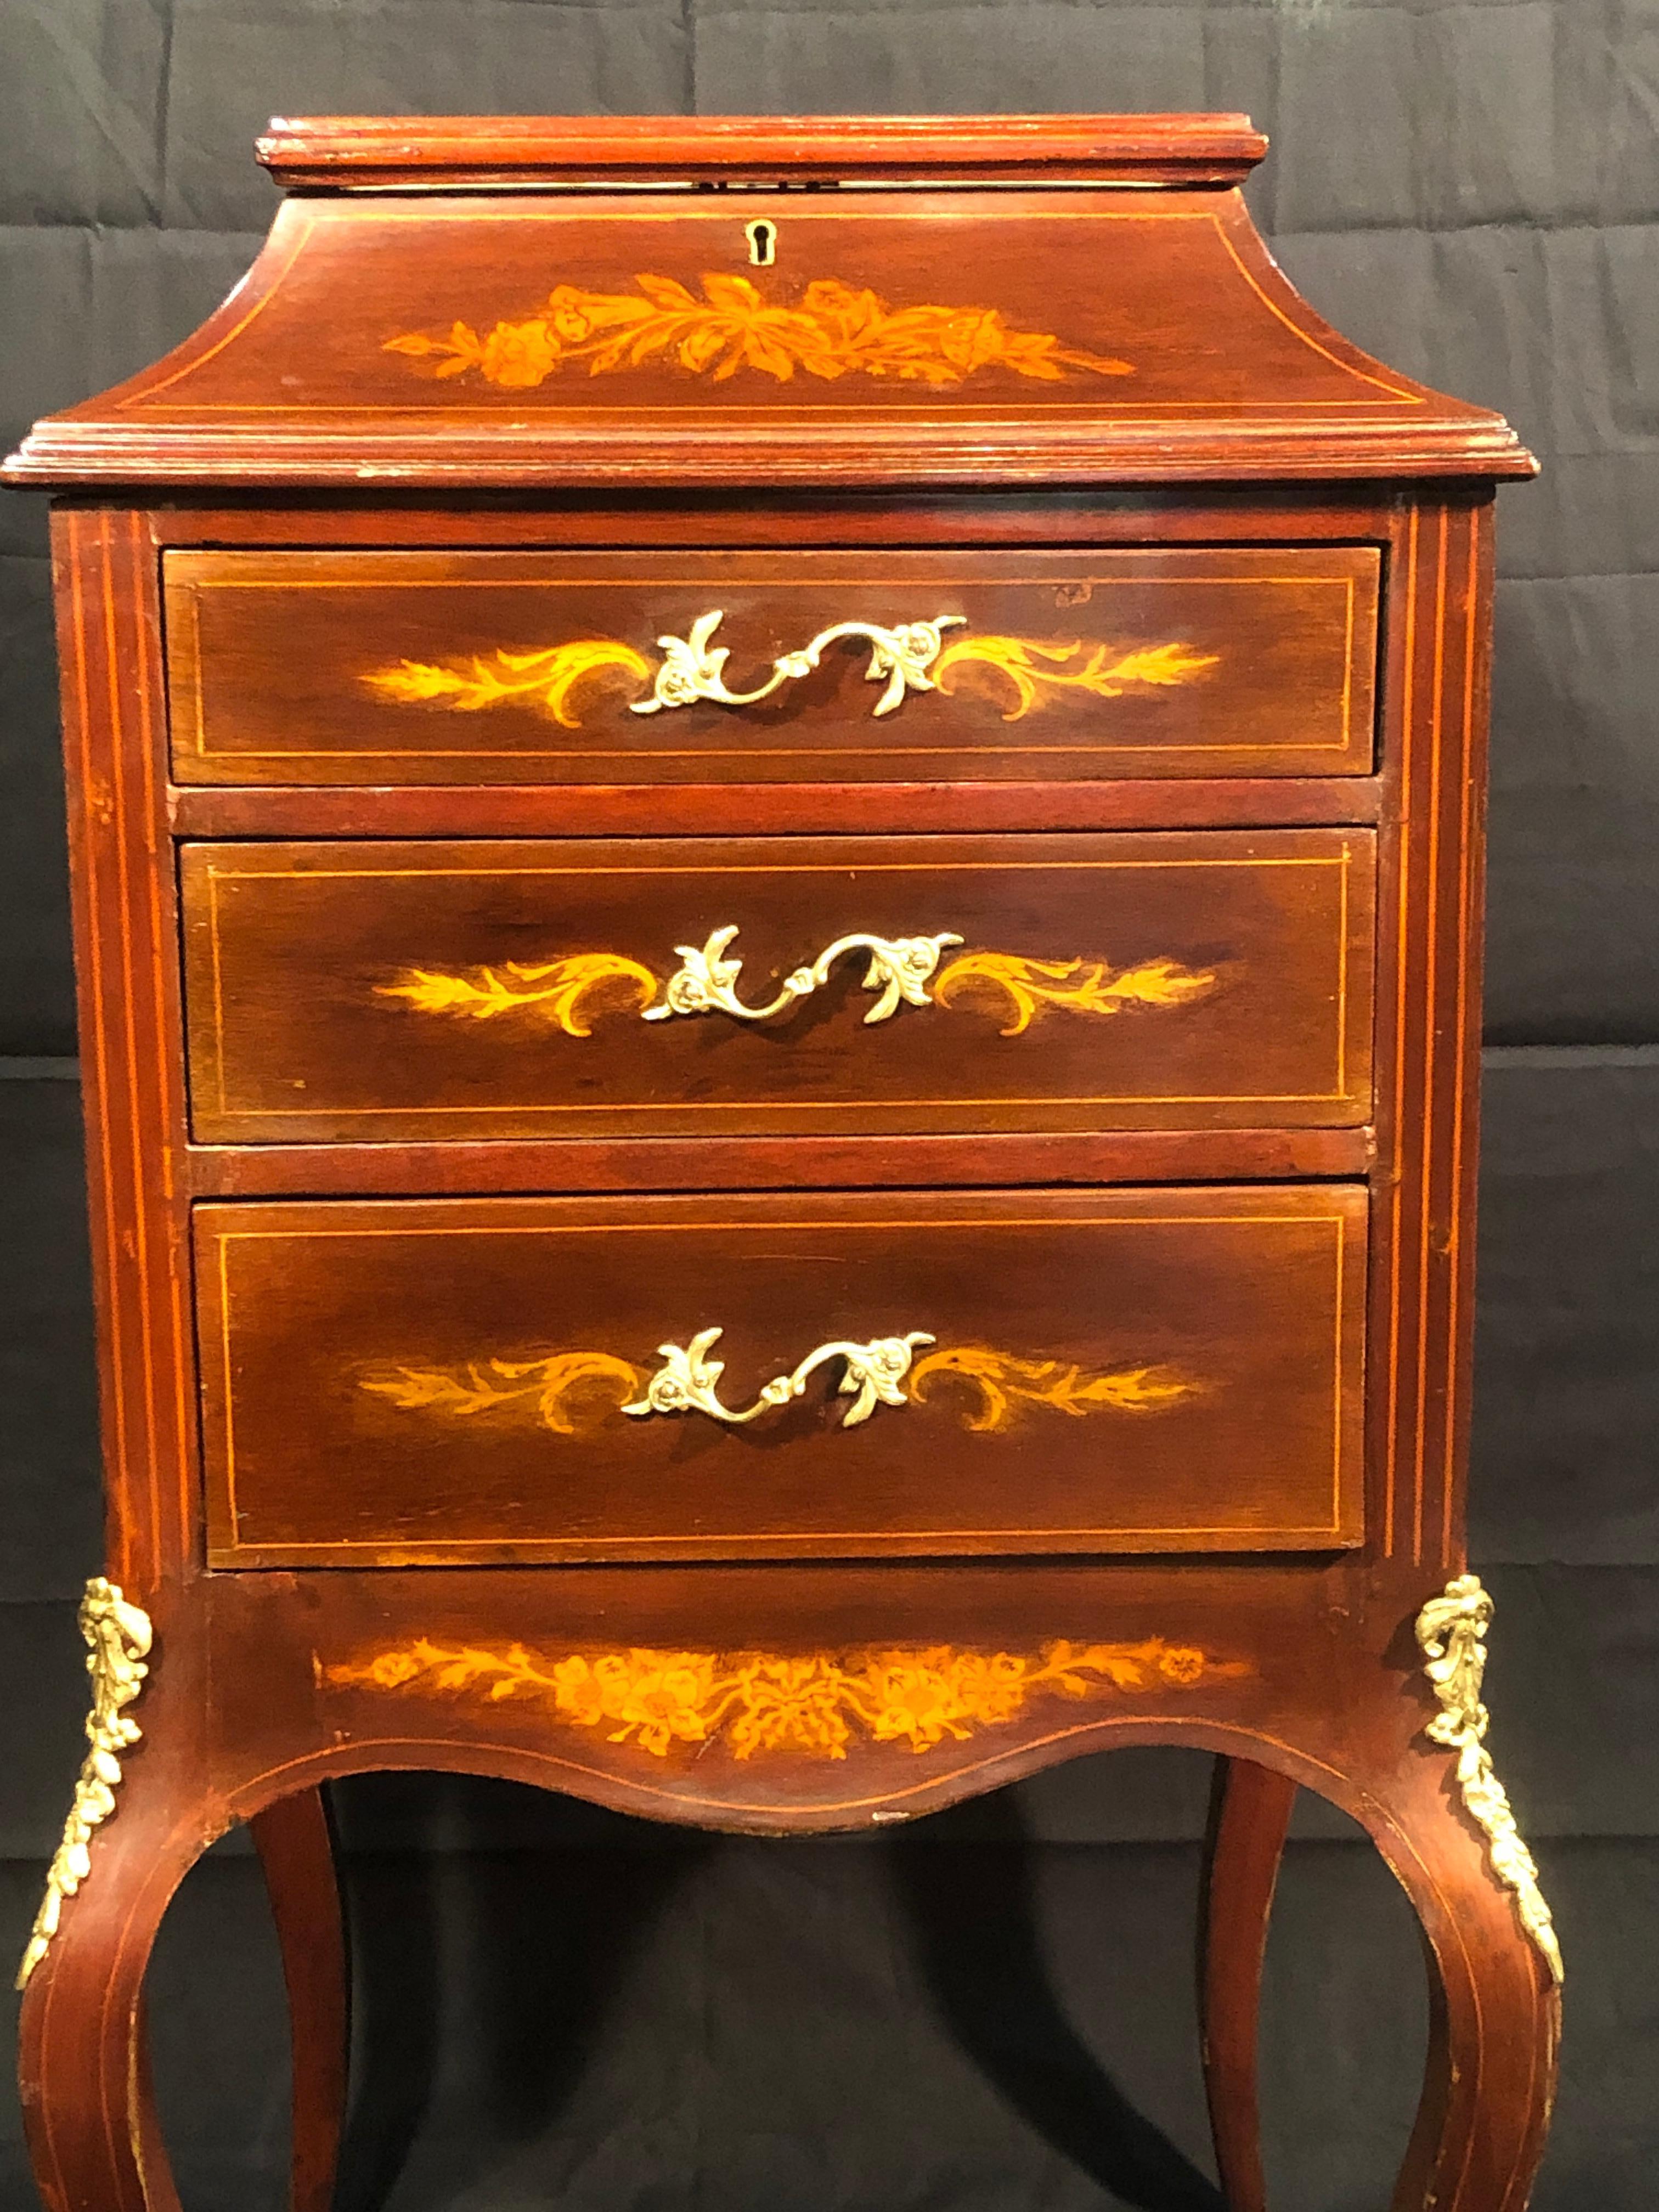 Display cabinet English, Edwardian period, 1900s, mahogany, inlaid boxwood, three drawers and counter top with door, the exhibition part is covered in moirè. In excellent state of conservation.